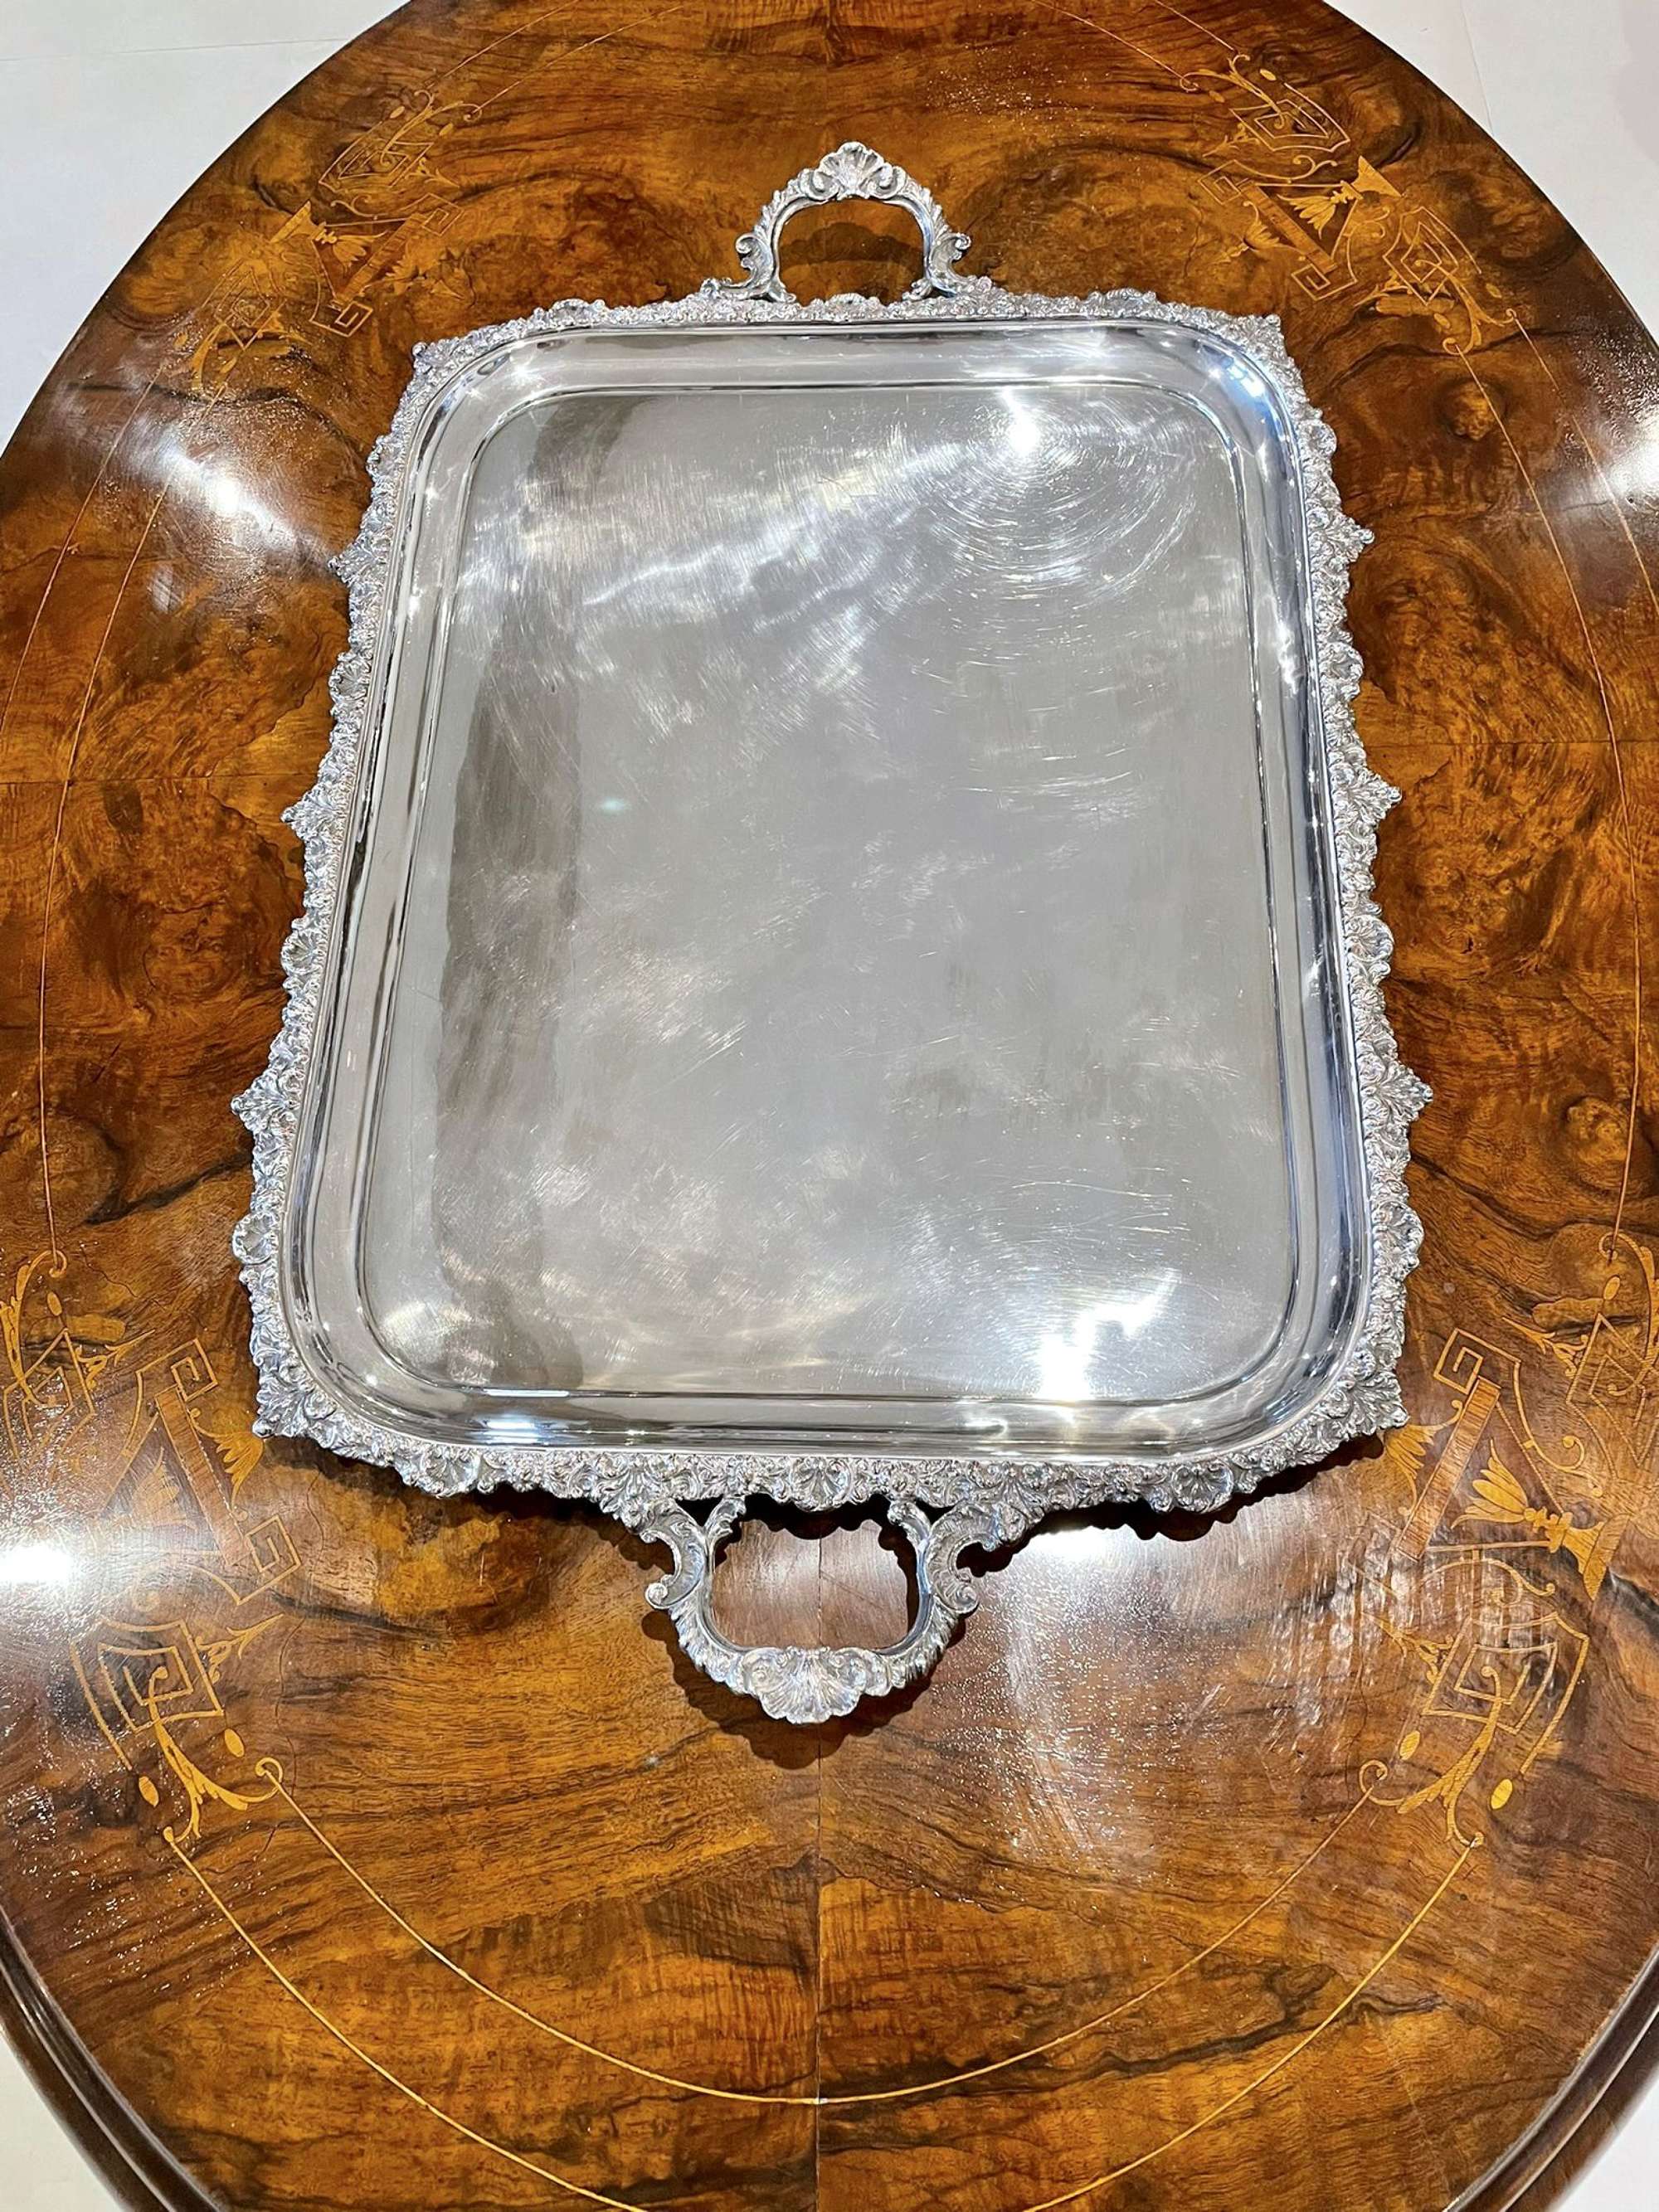 Superb Quality Large Antique Victorian Silver Plated Tea Tray